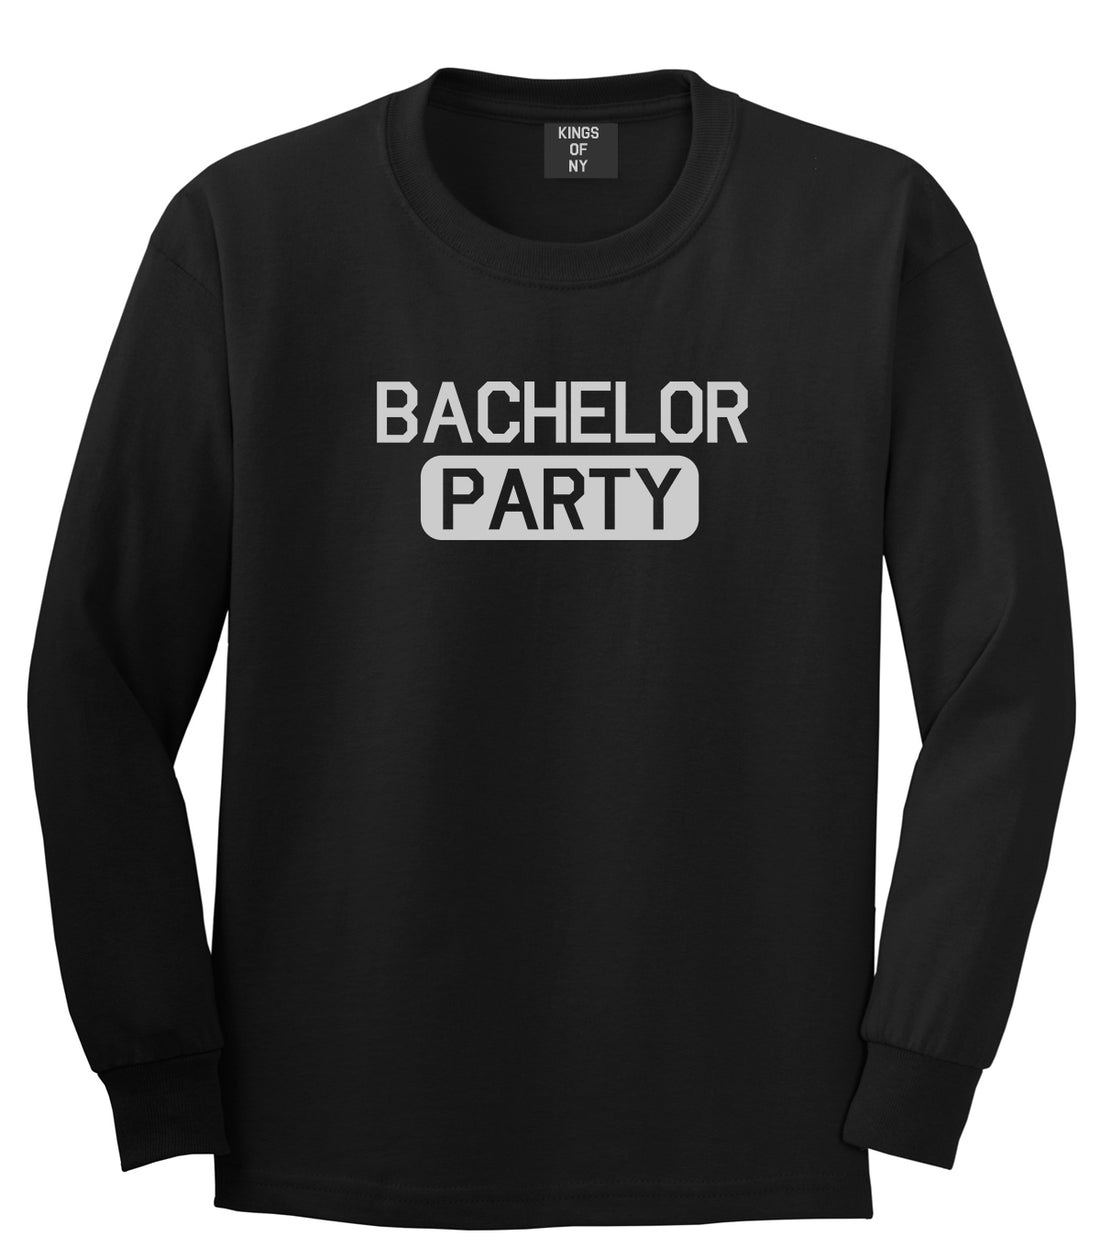 Bachelor Party Black Long Sleeve T-Shirt by Kings Of NY